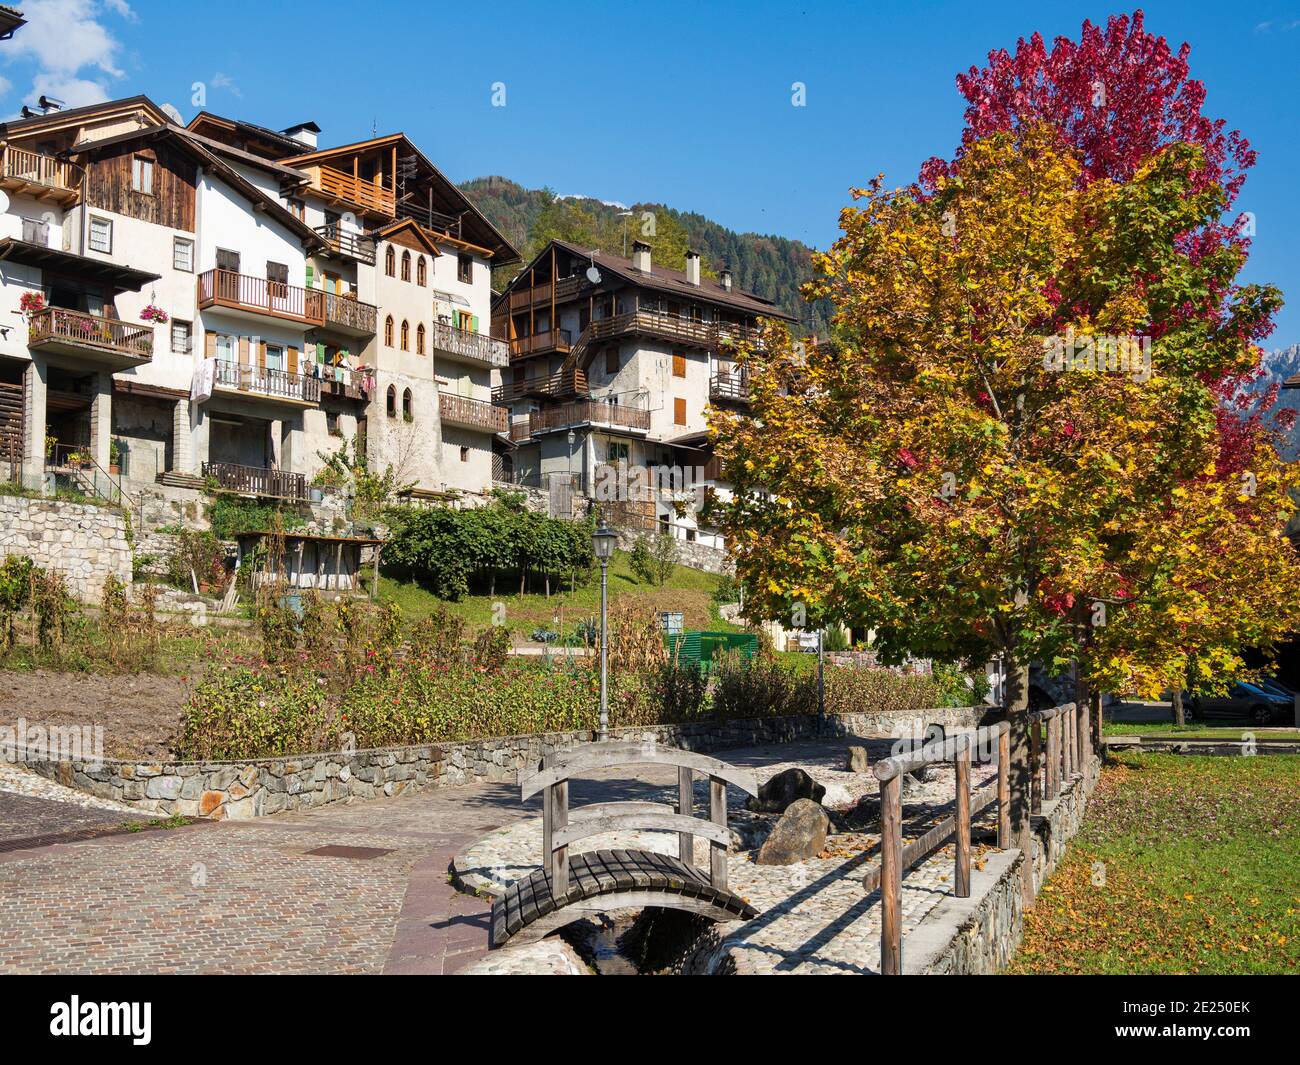 Traditional architecture of the Primiero. Tonadico in the valley of Primiero in the Dolomites of Trentino. Europe, Central Europe, Italy Stock Photo